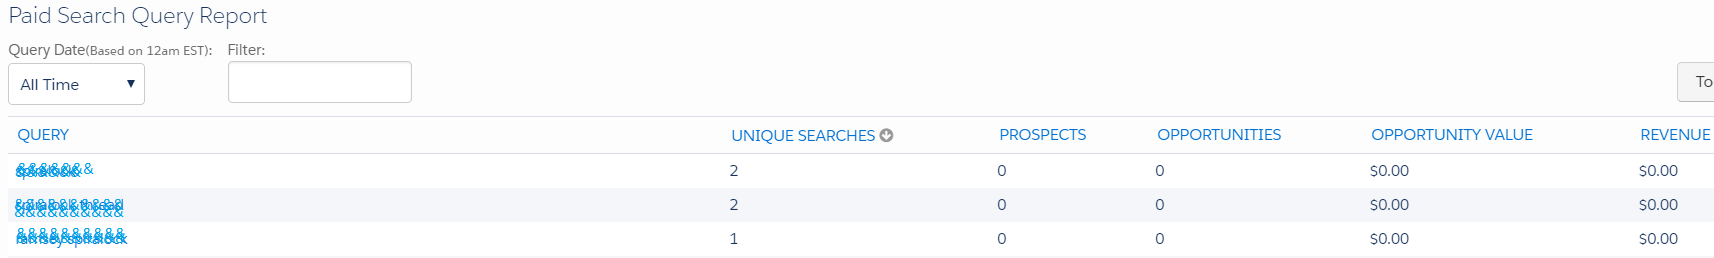 Pardot Paid Search Query Report